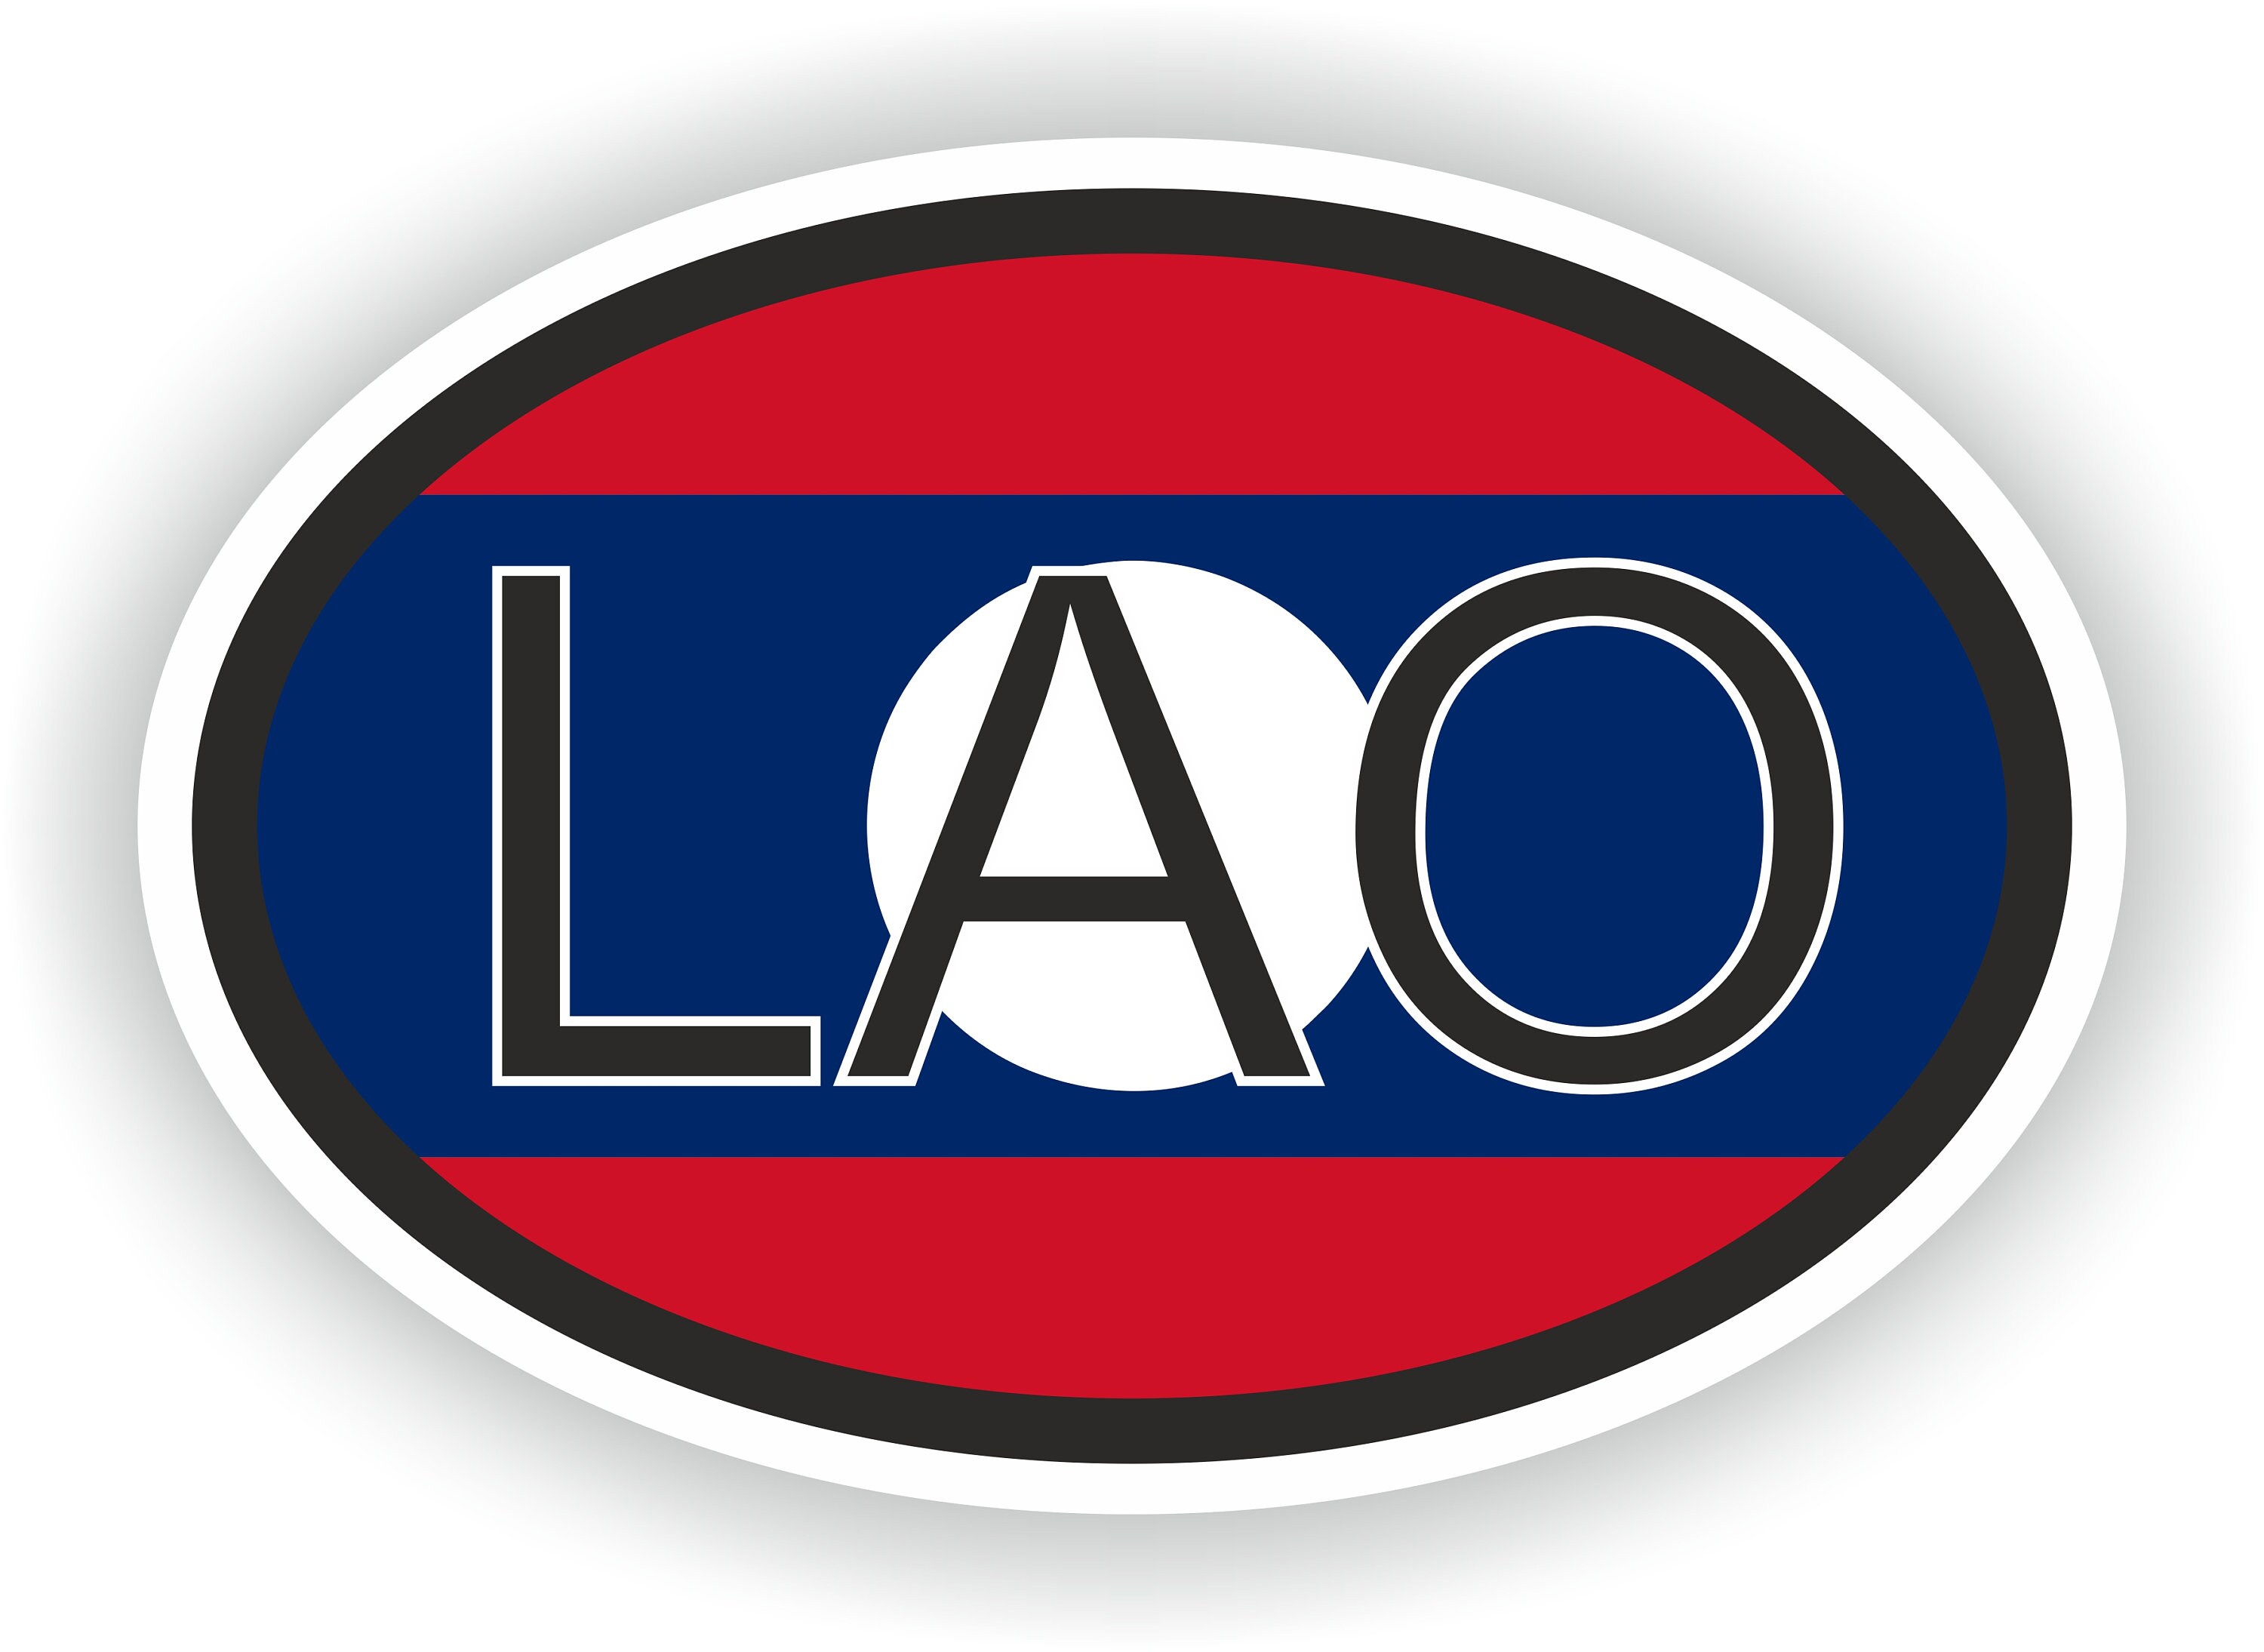 LAO Laos COUNTRY CODE OVAL WITH FLAG STICKER bumper decal car bike tablet 